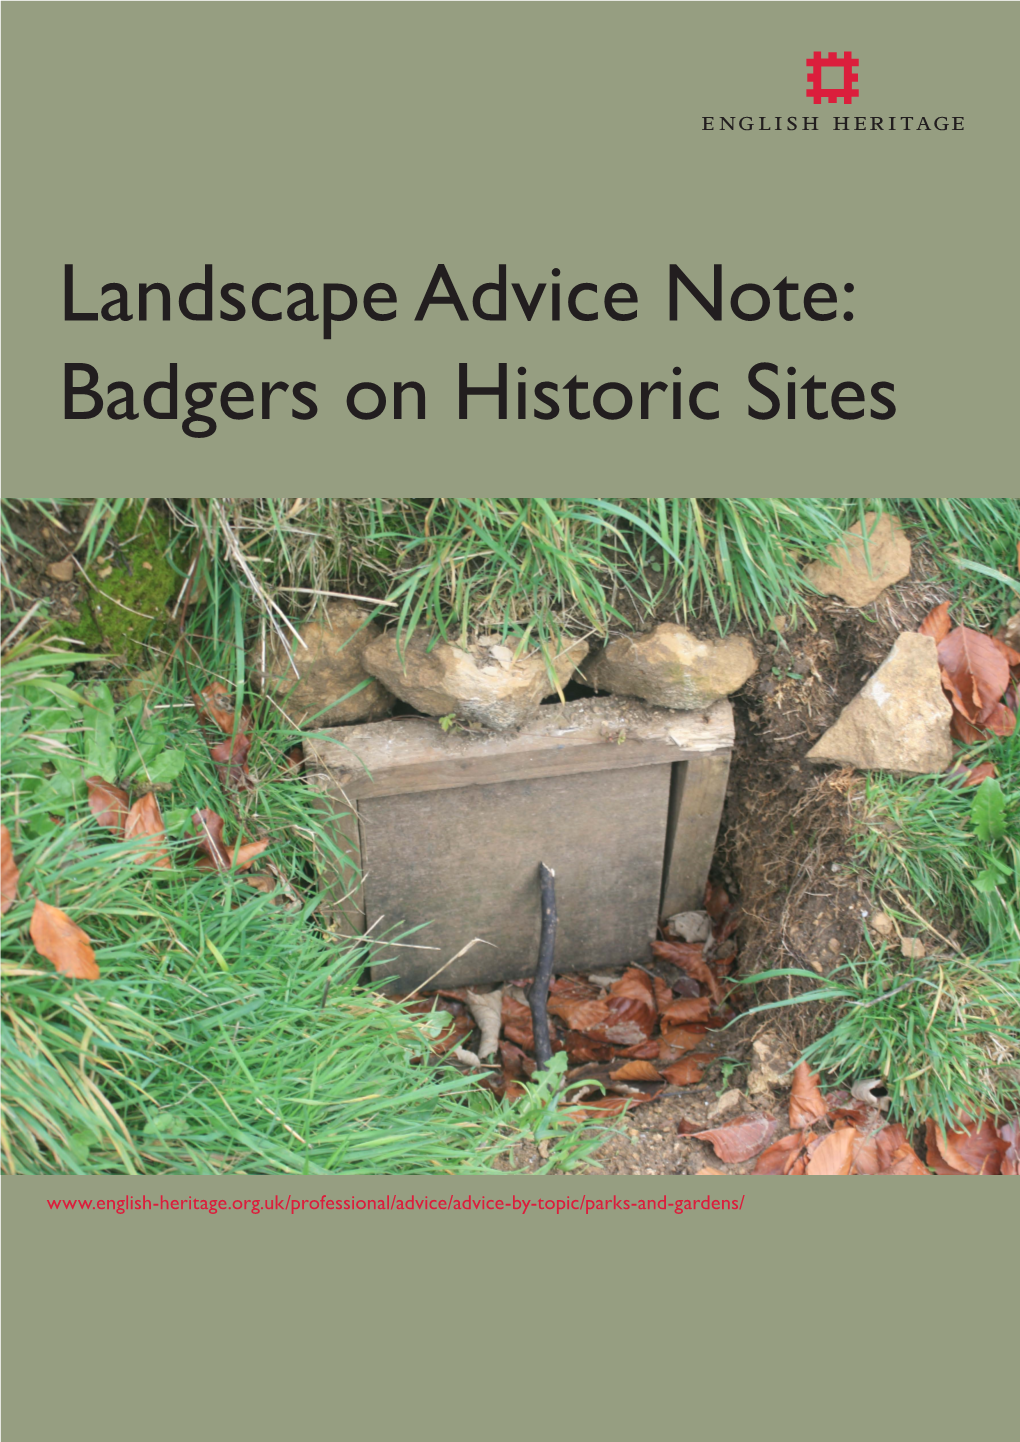 Landscape Advice Note: Badgers on Historic Sites